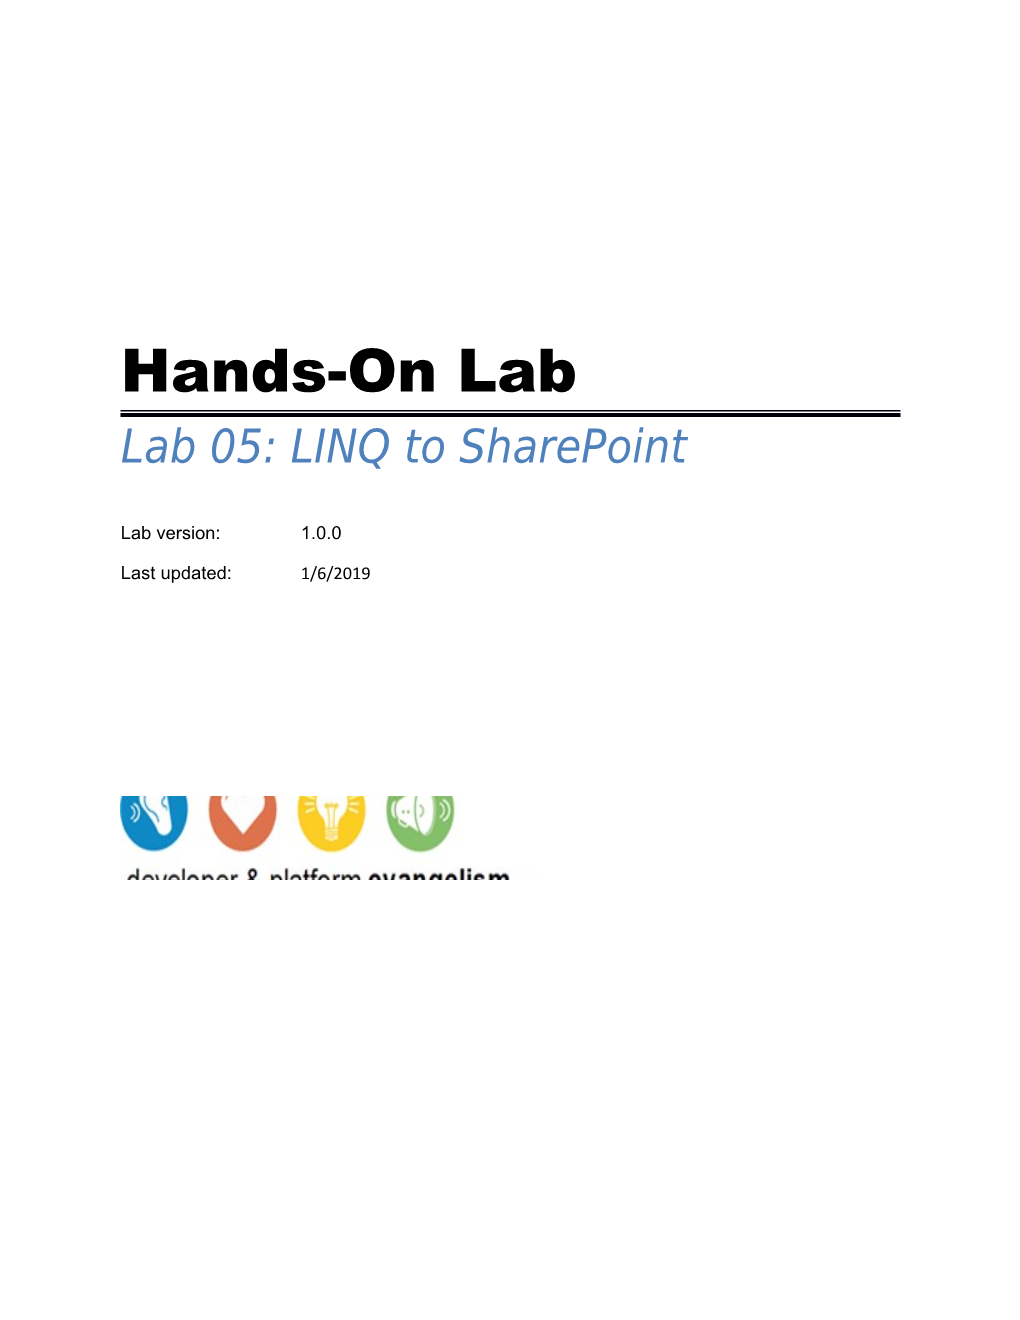 Linq to Sharepoint Lab